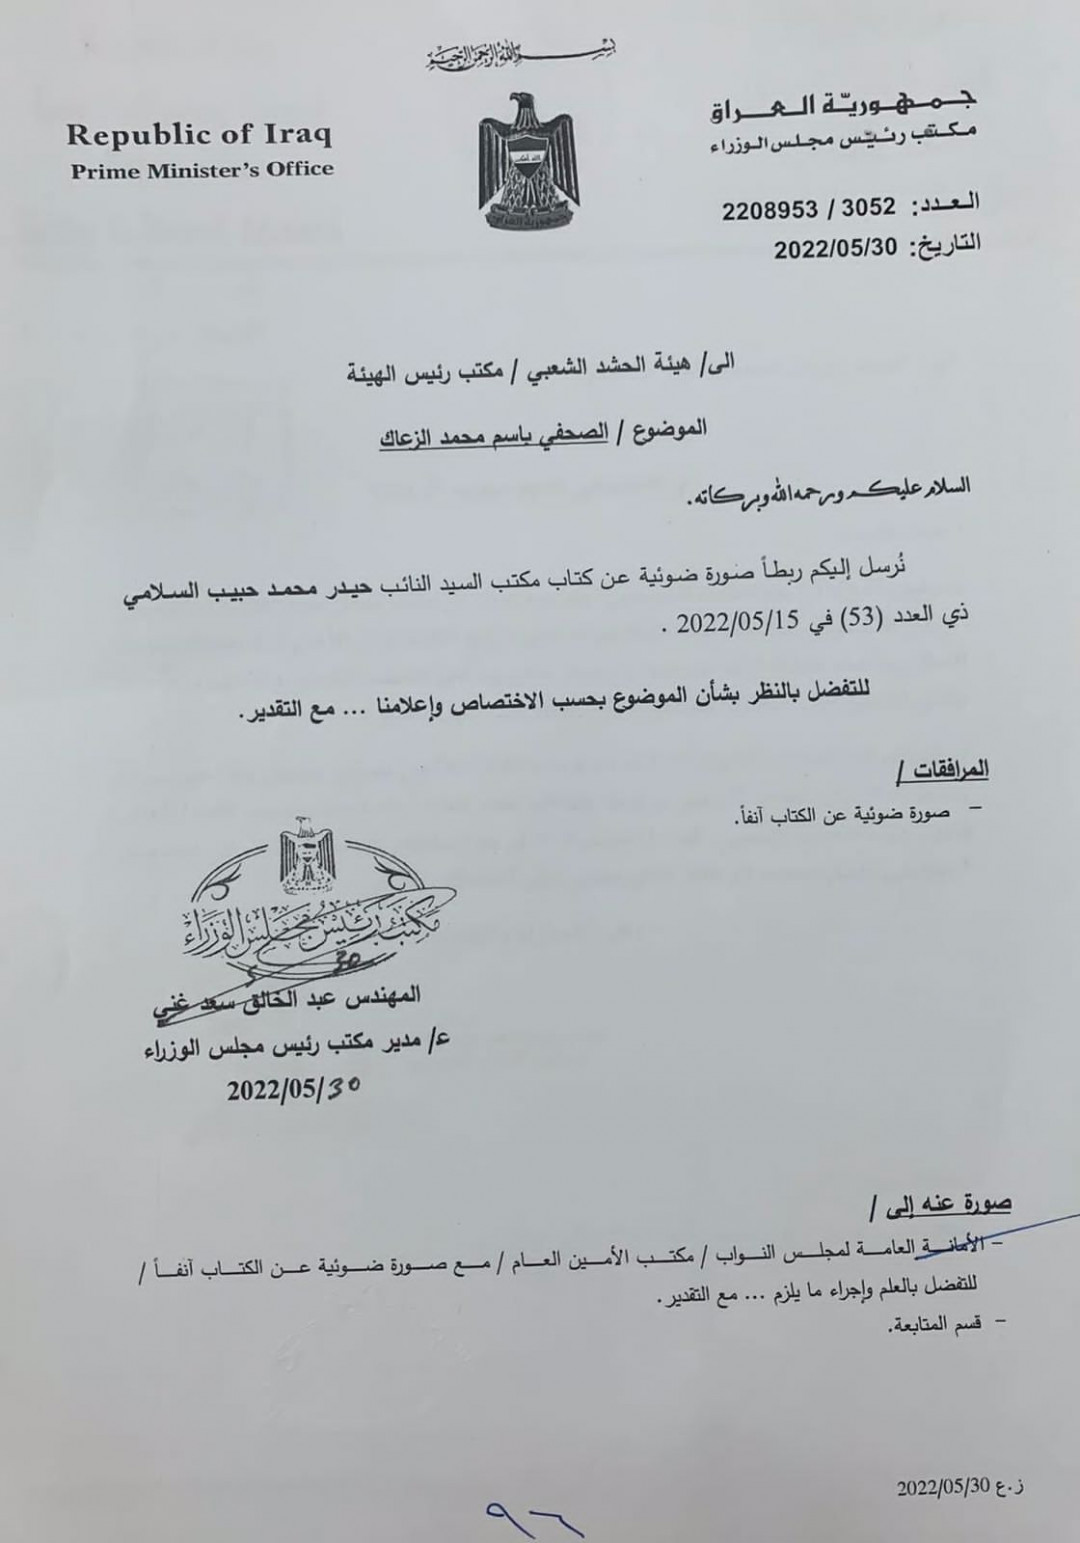 PM al-Kadhimi requests clarification from PMF about a journalist's fate 